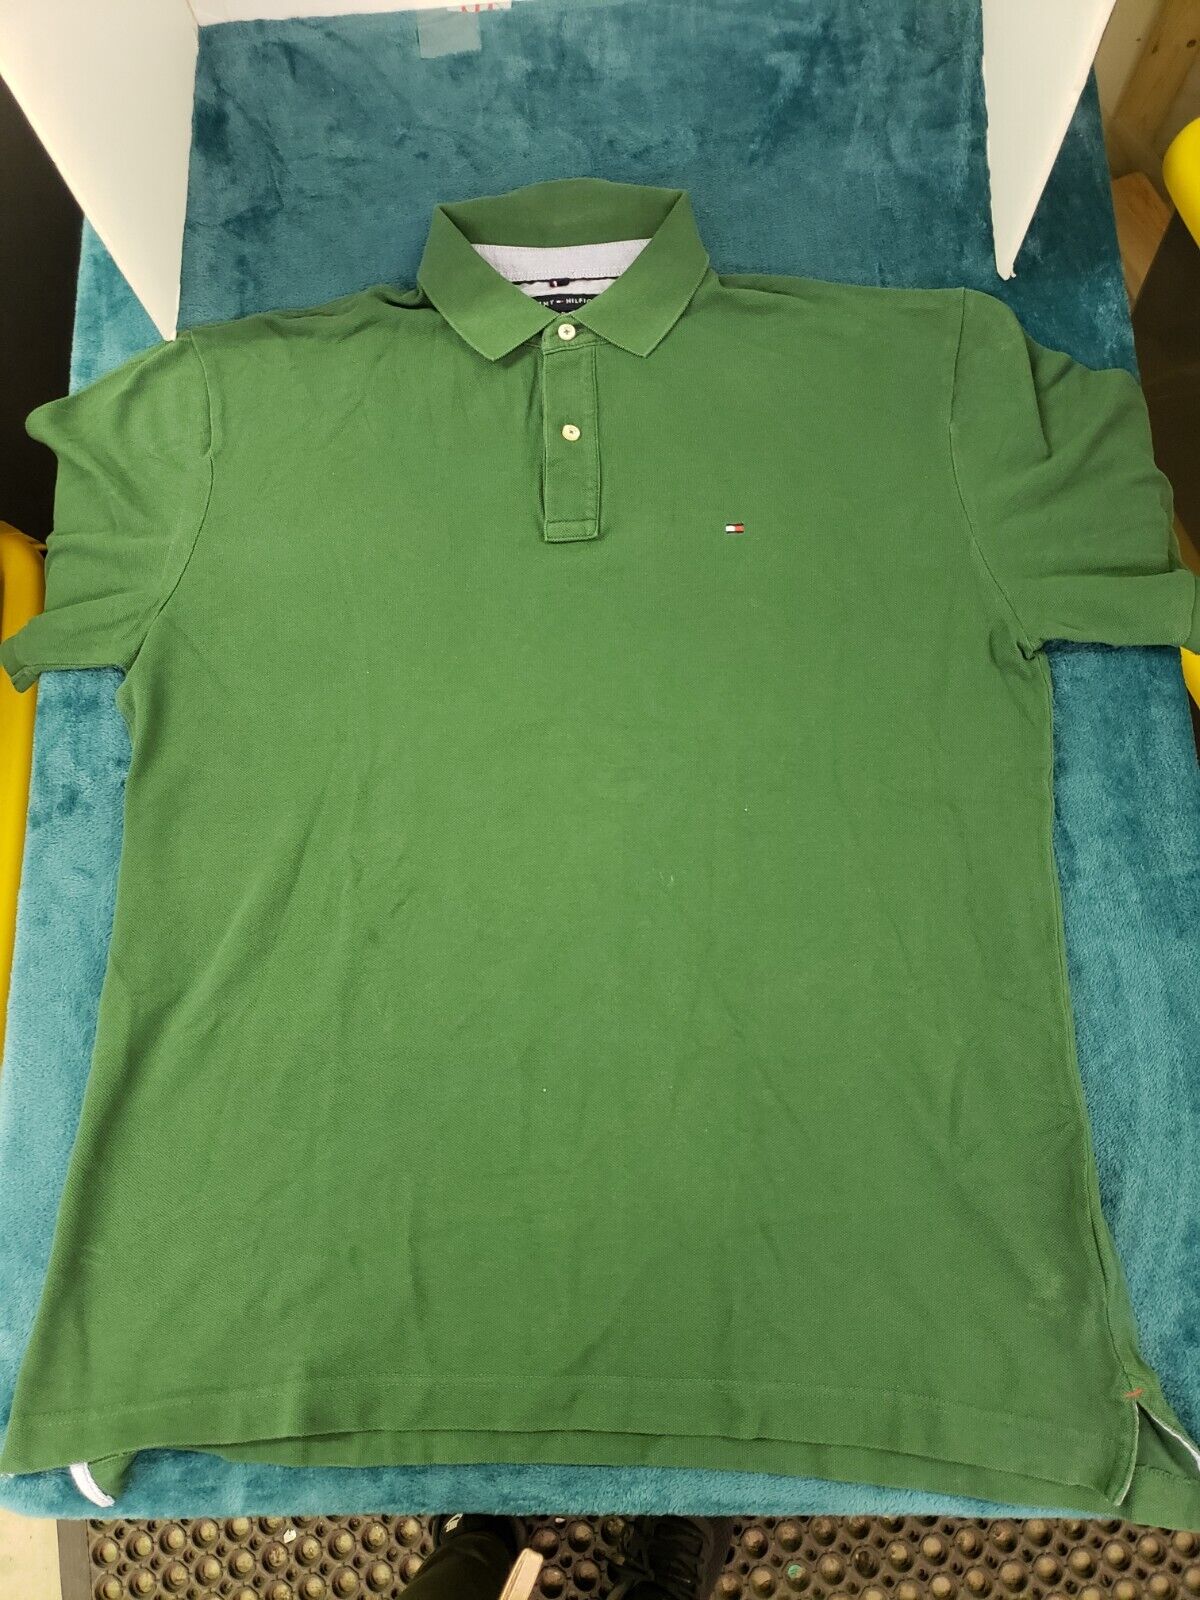 Tommy Green Short Sleeve Polo Shirt Size Large Classic Cotton | eBay